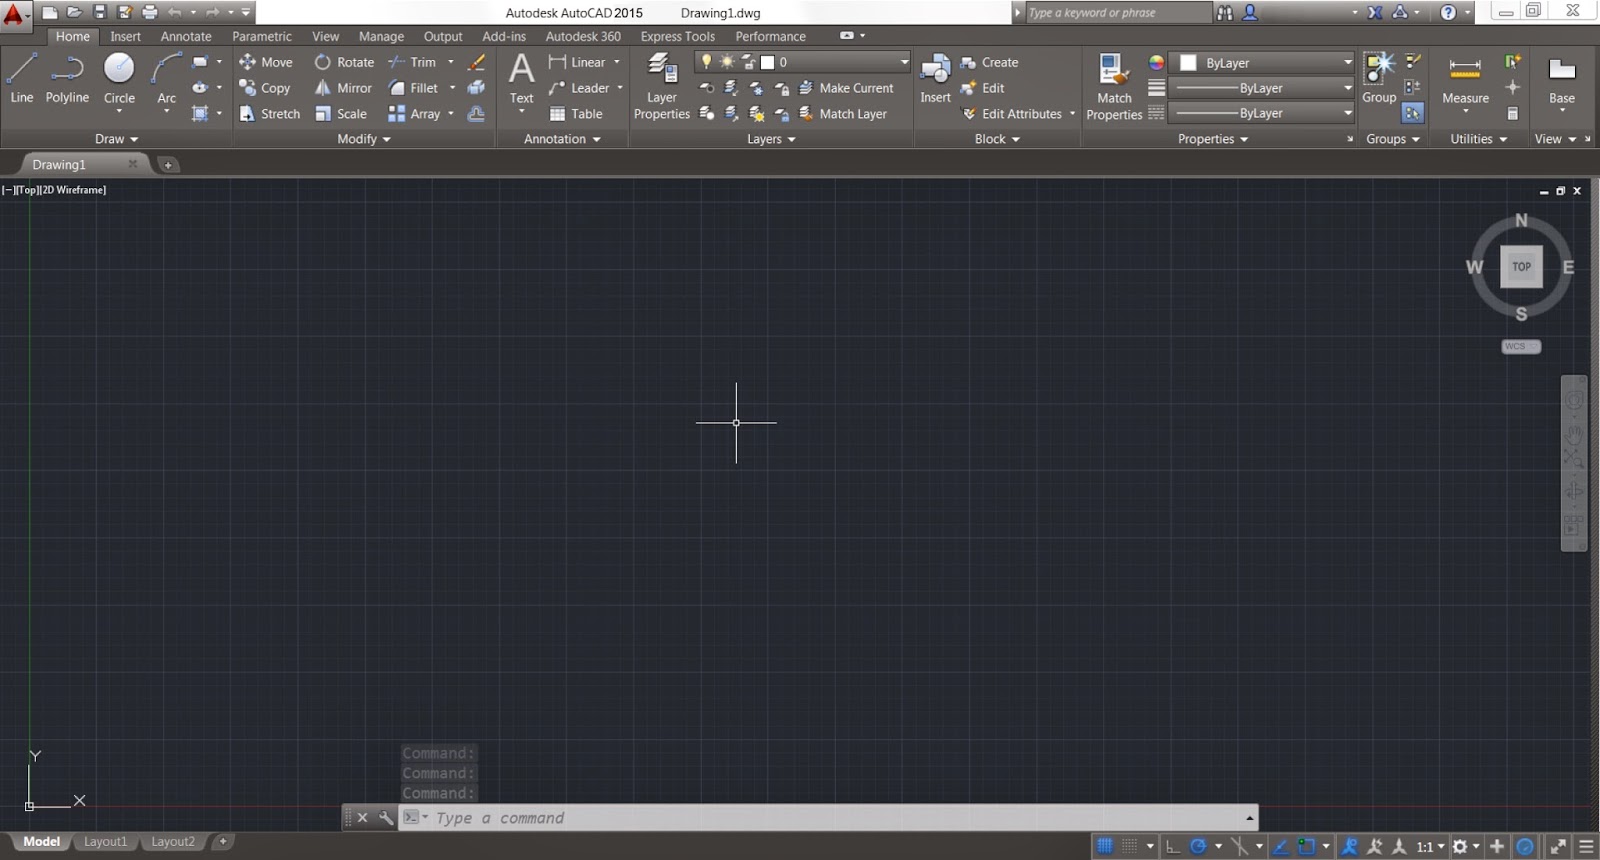 Autocad 2015 free download with 64 bit